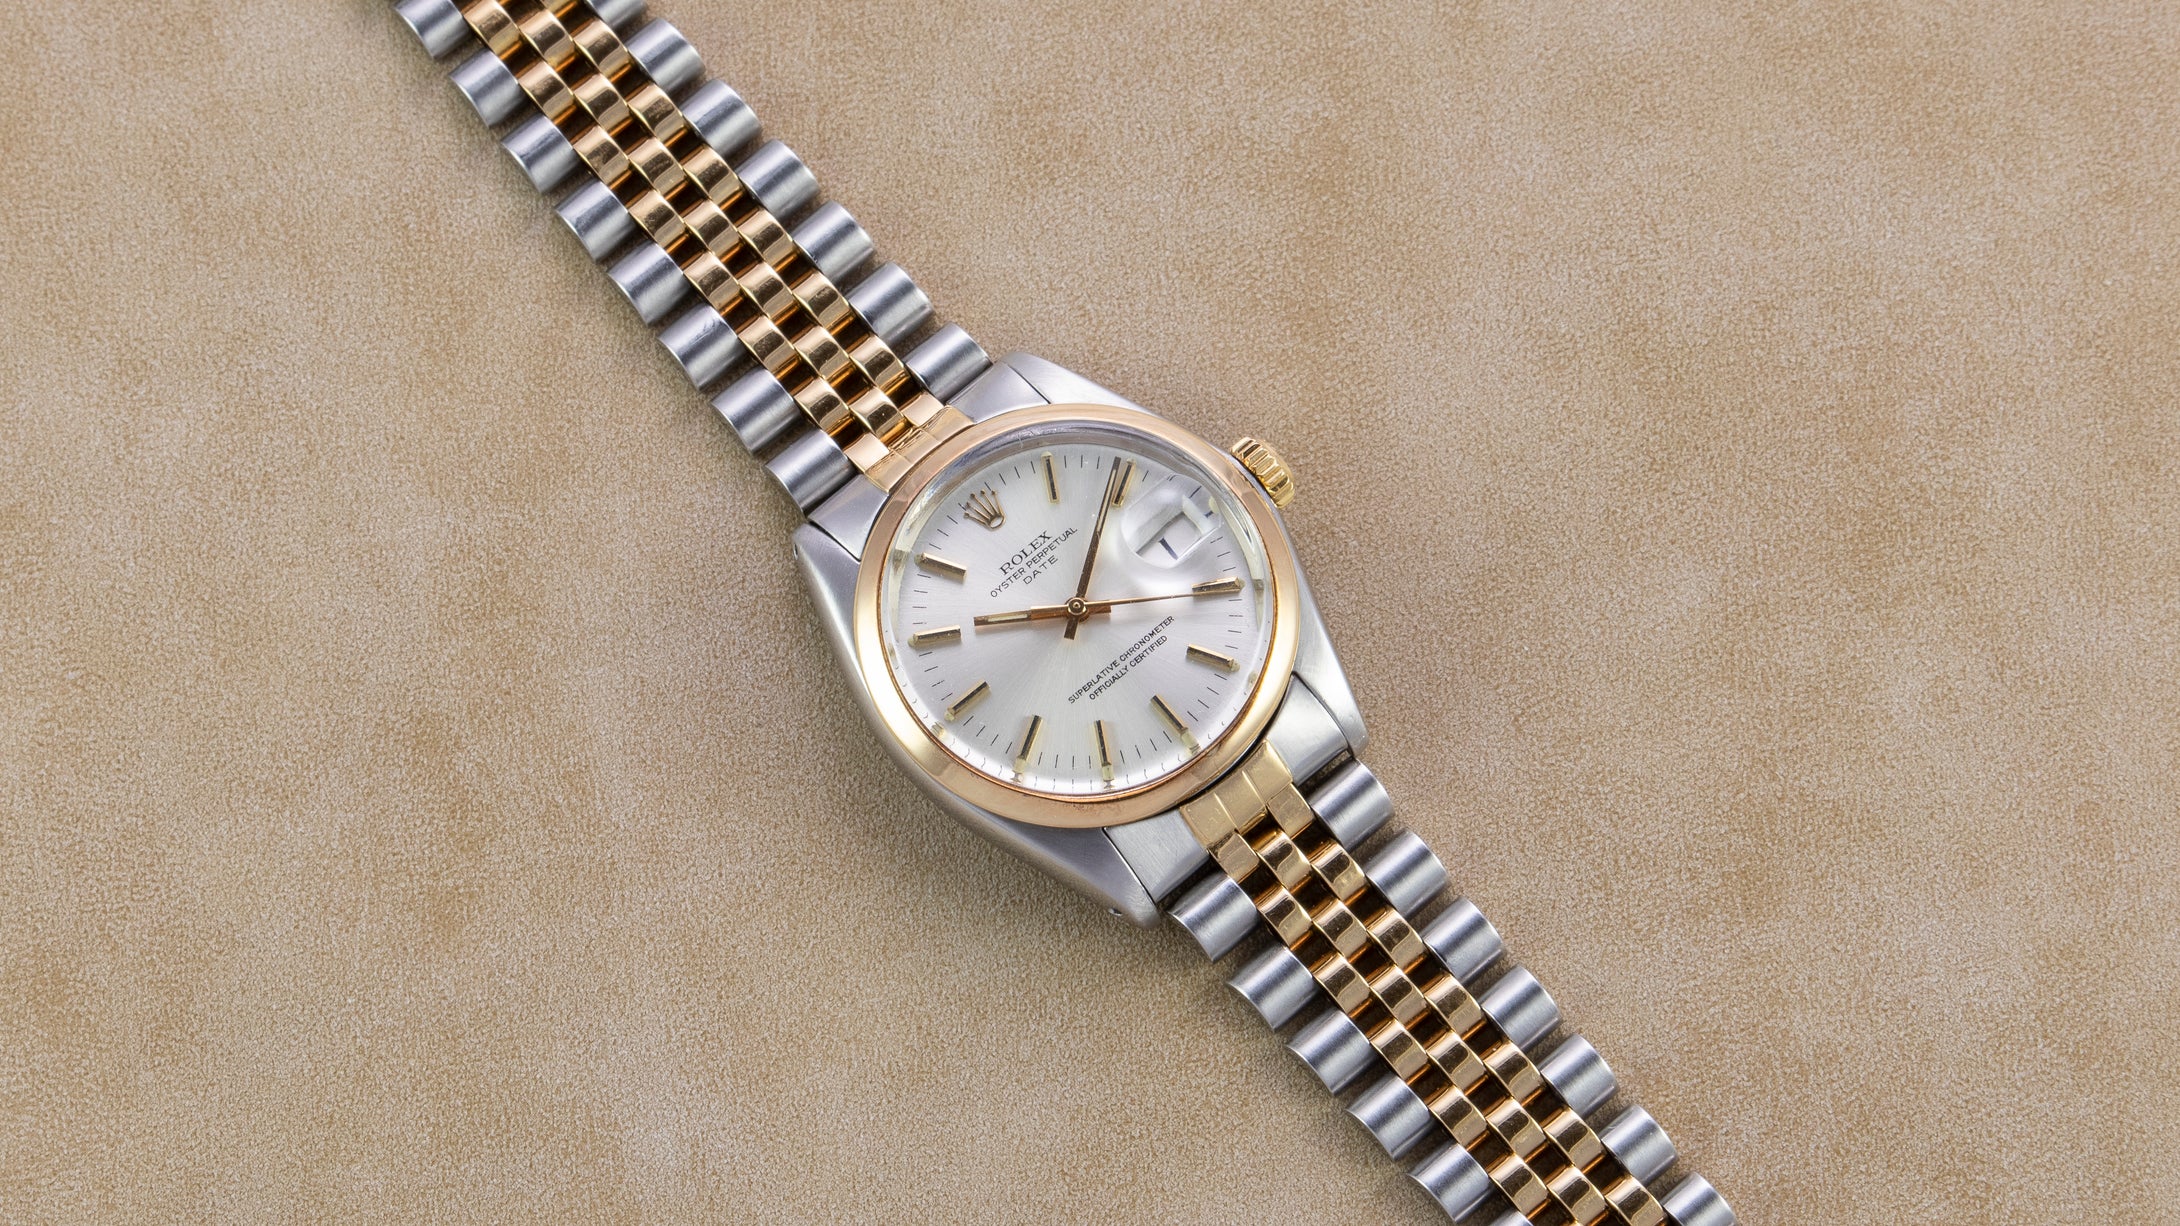 Rolex Two-Tone Oyster Perpetual Date Vintage Watch with Jubilee Bracelet | Veralet